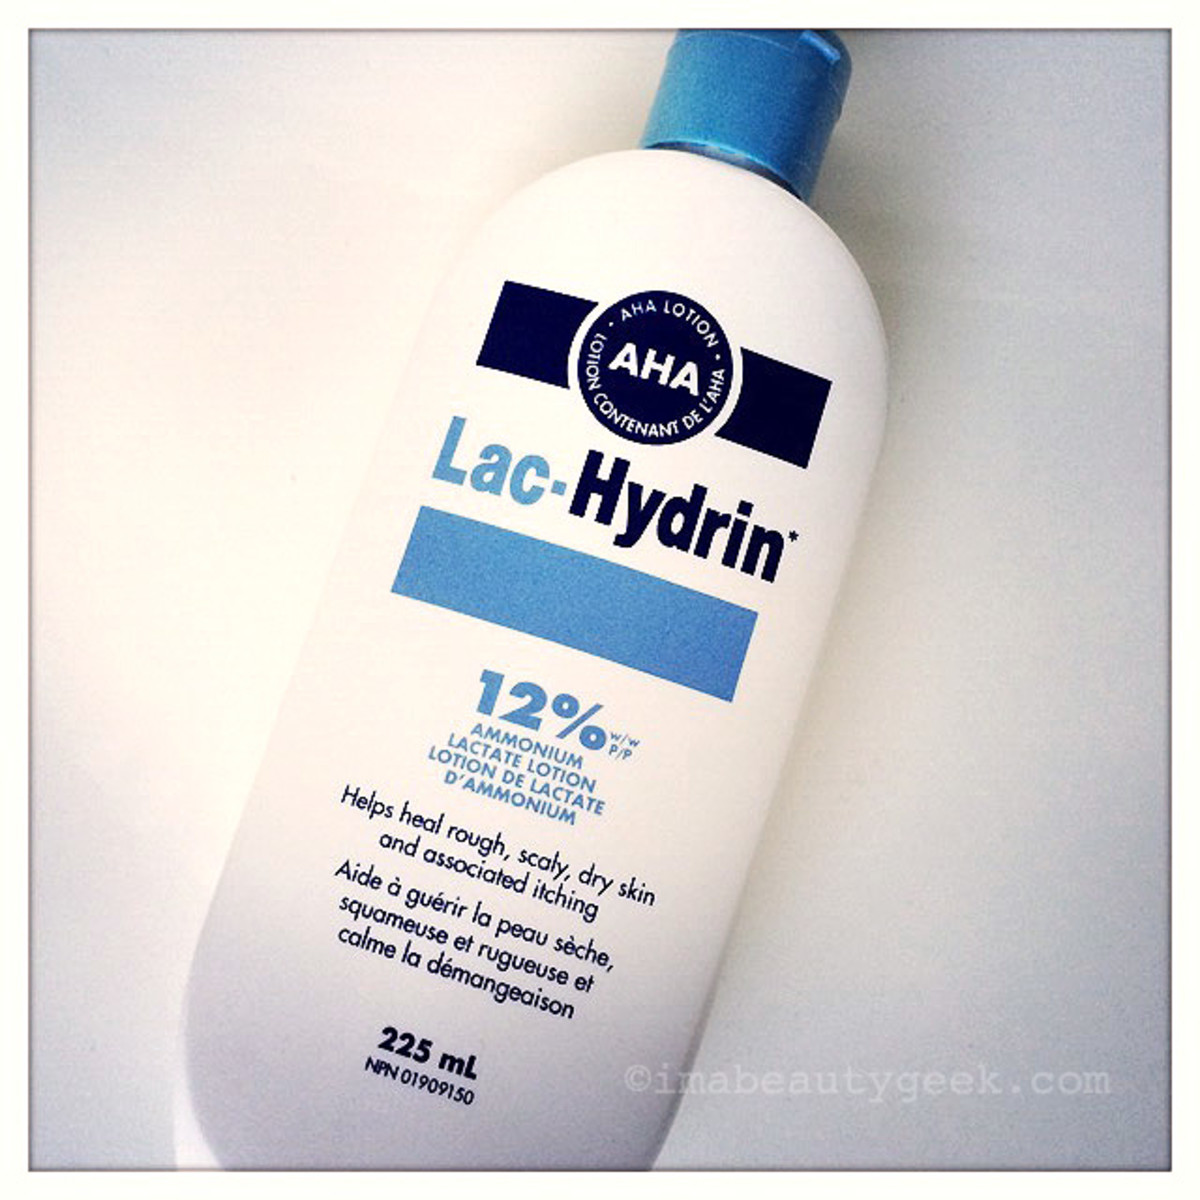 Lac-Hydrin 12 AHA Lotion_five exfoliating body lotions for softer, smoother skin